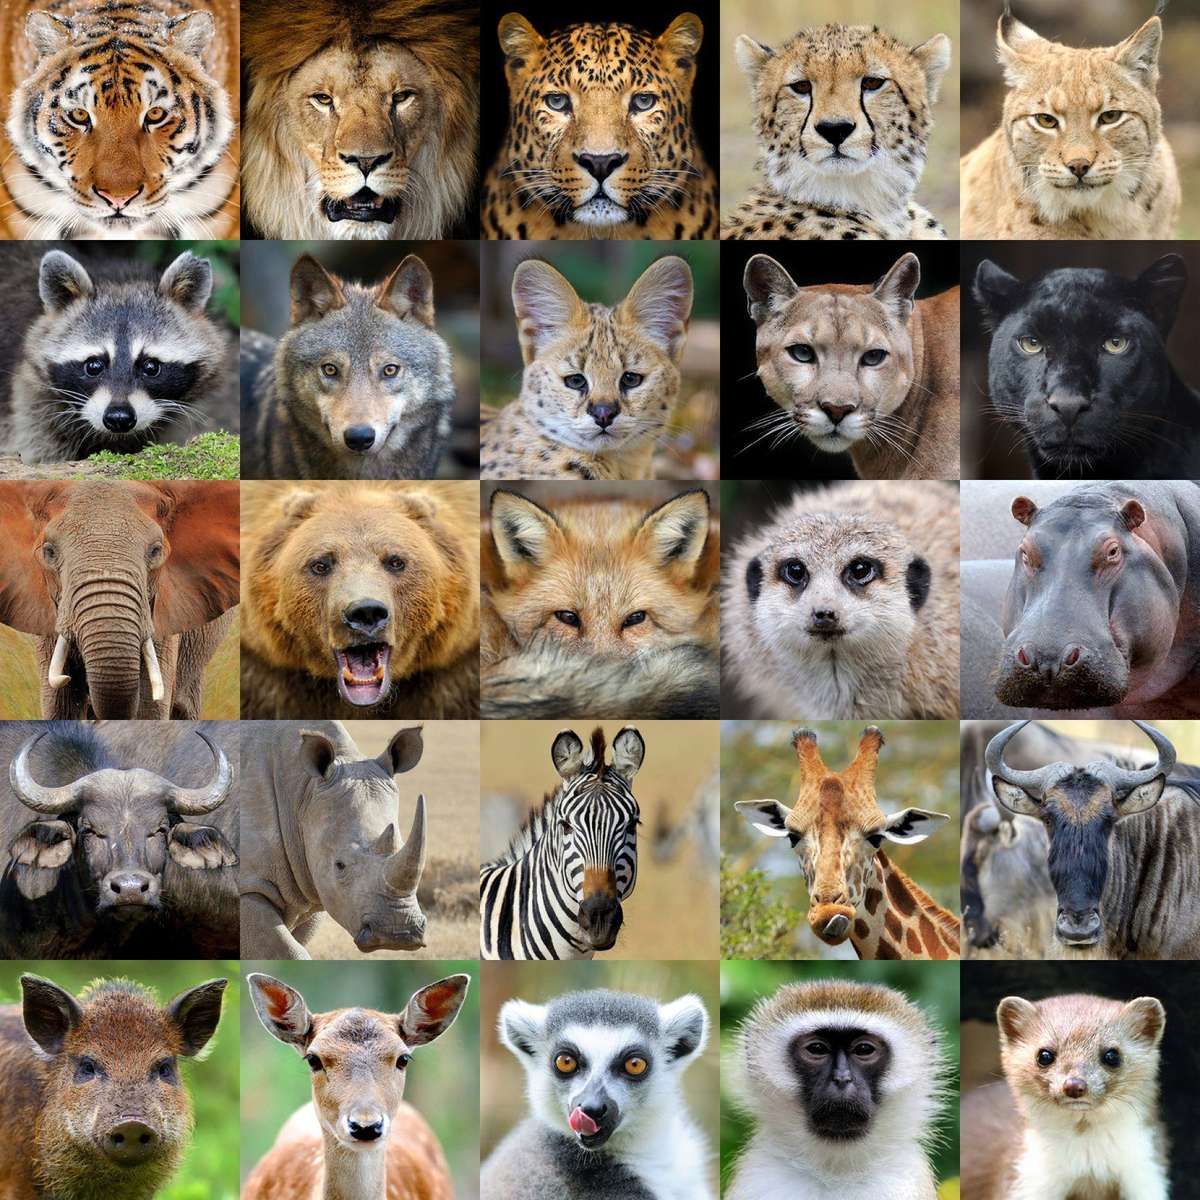 A Visit to the Zoo puzzle online from photo